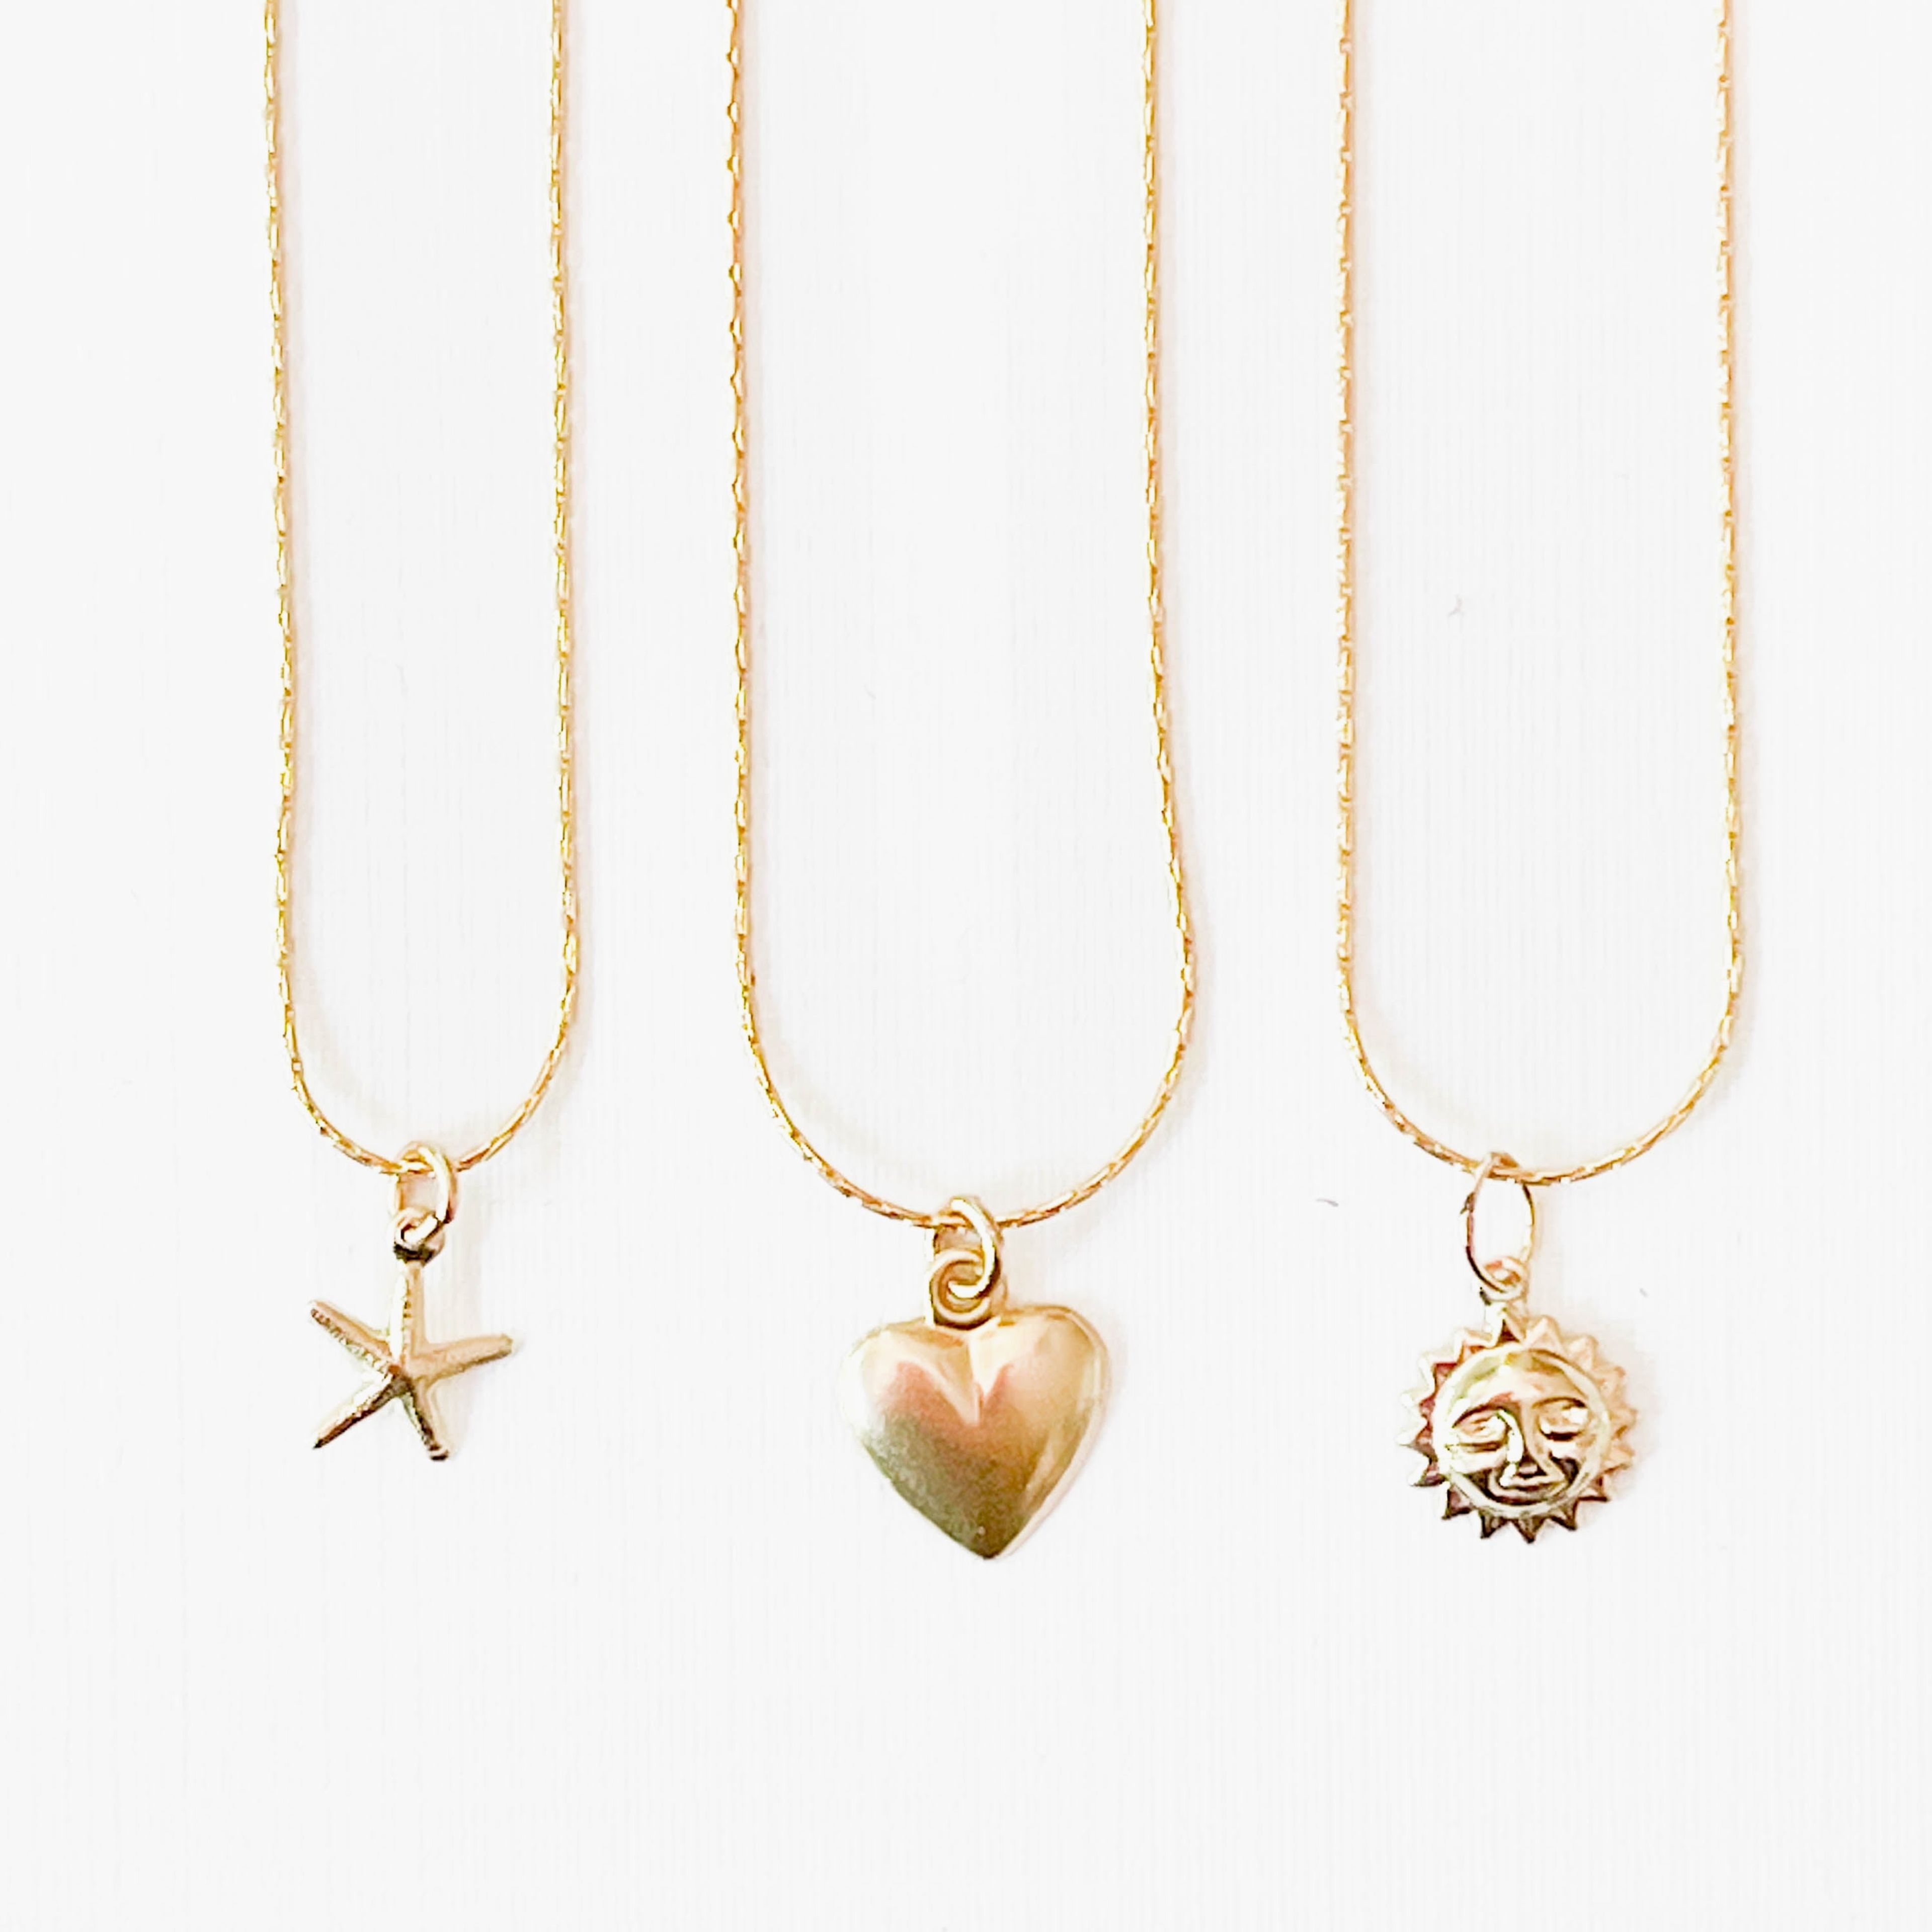 Gold Filled Charm Necklace with a Heart, Starfish or Sun  - WS